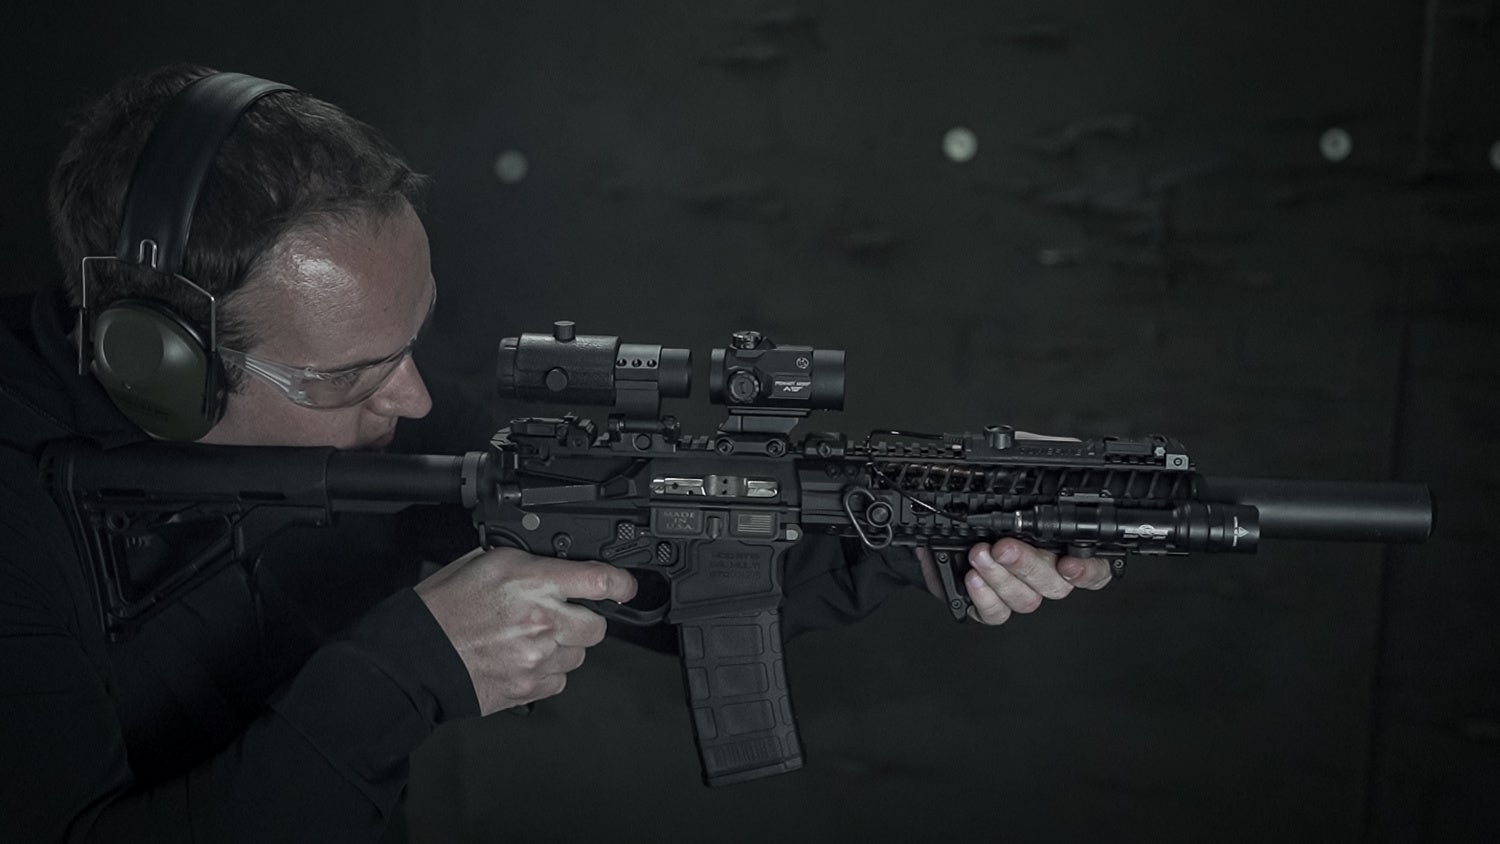 SILENCER SATURDAY #159: The Spike’s Tactical Compressor - Credit: Ryan Ogborn 